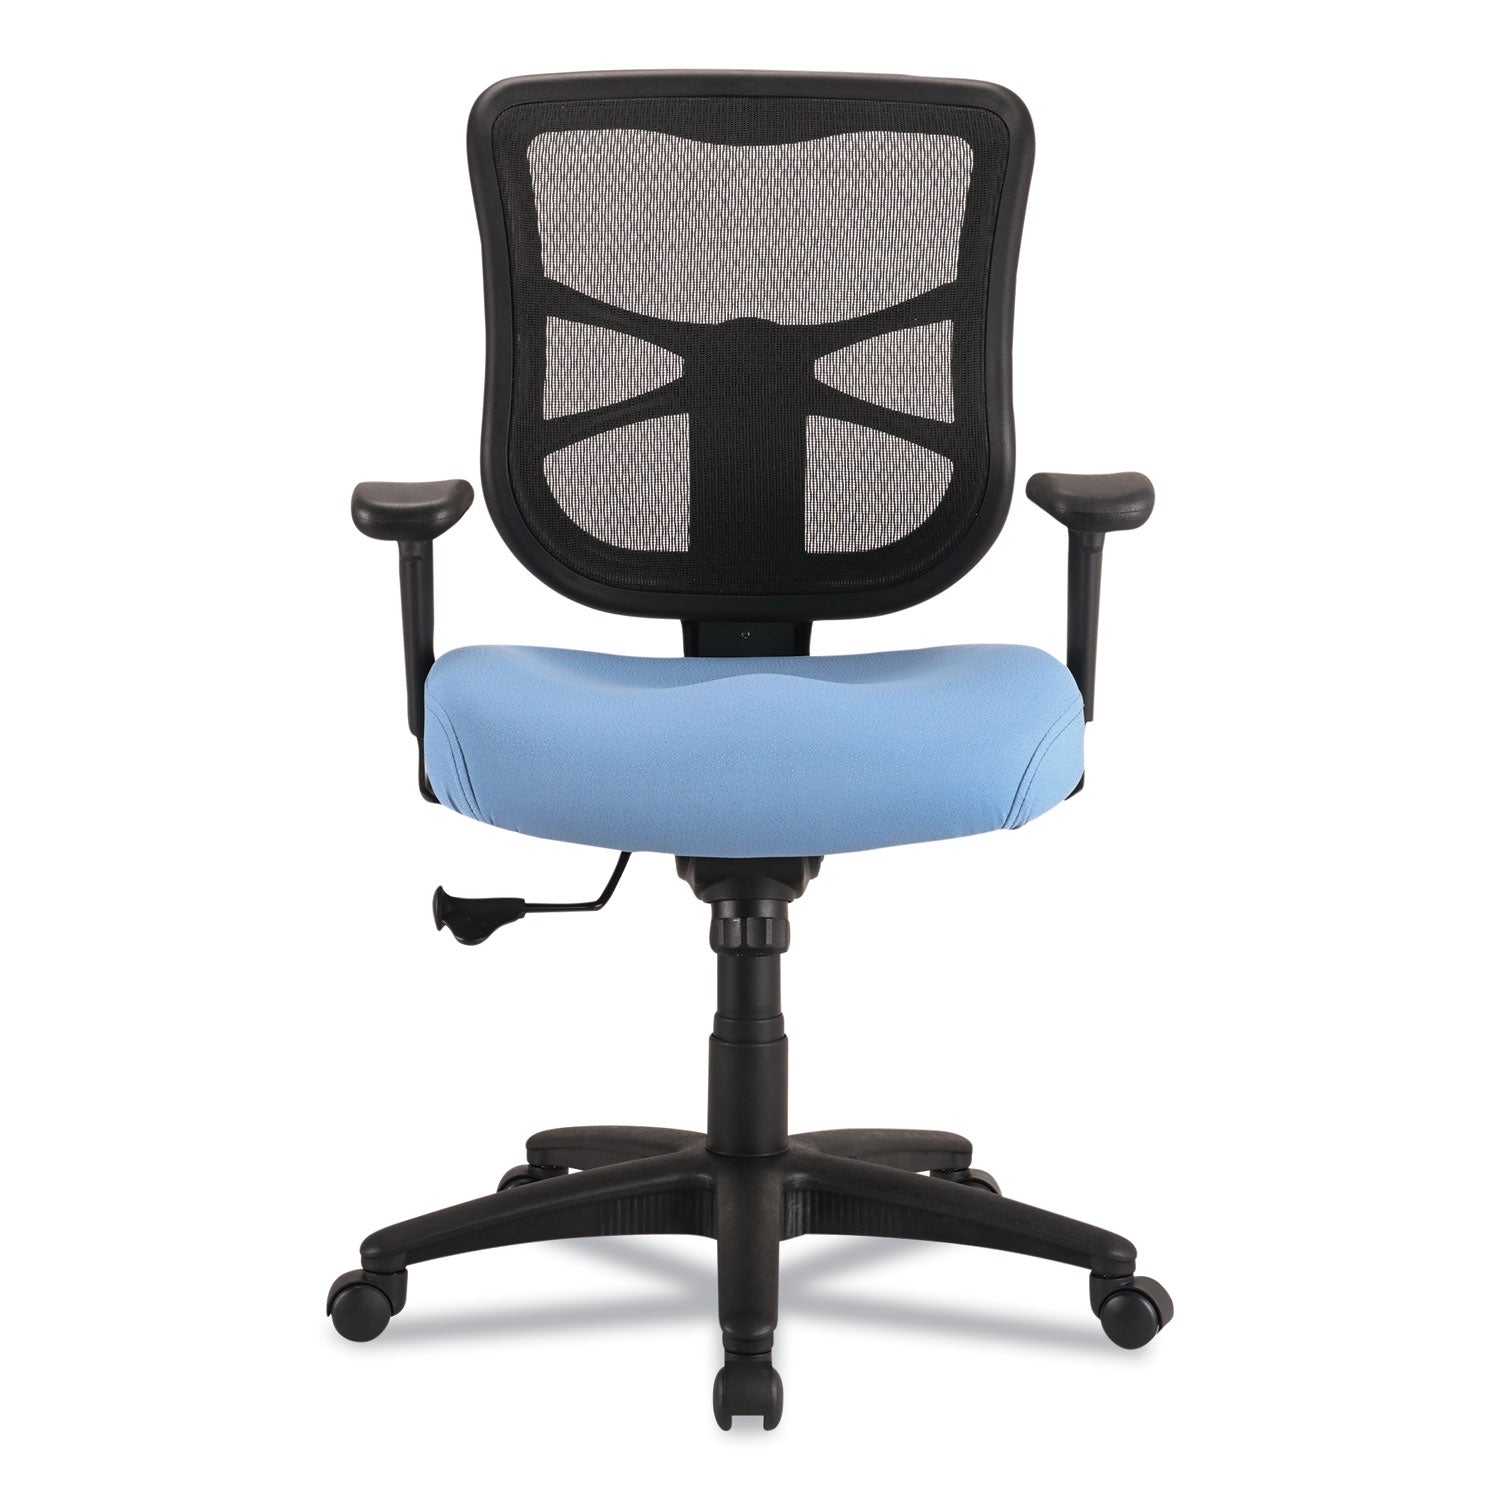 alera-elusion-series-mesh-mid-back-swivel-tilt-chair-supports-up-to-275-lb-179-to-218-seat-height-light-blue-seat_aleel42bme70b - 3